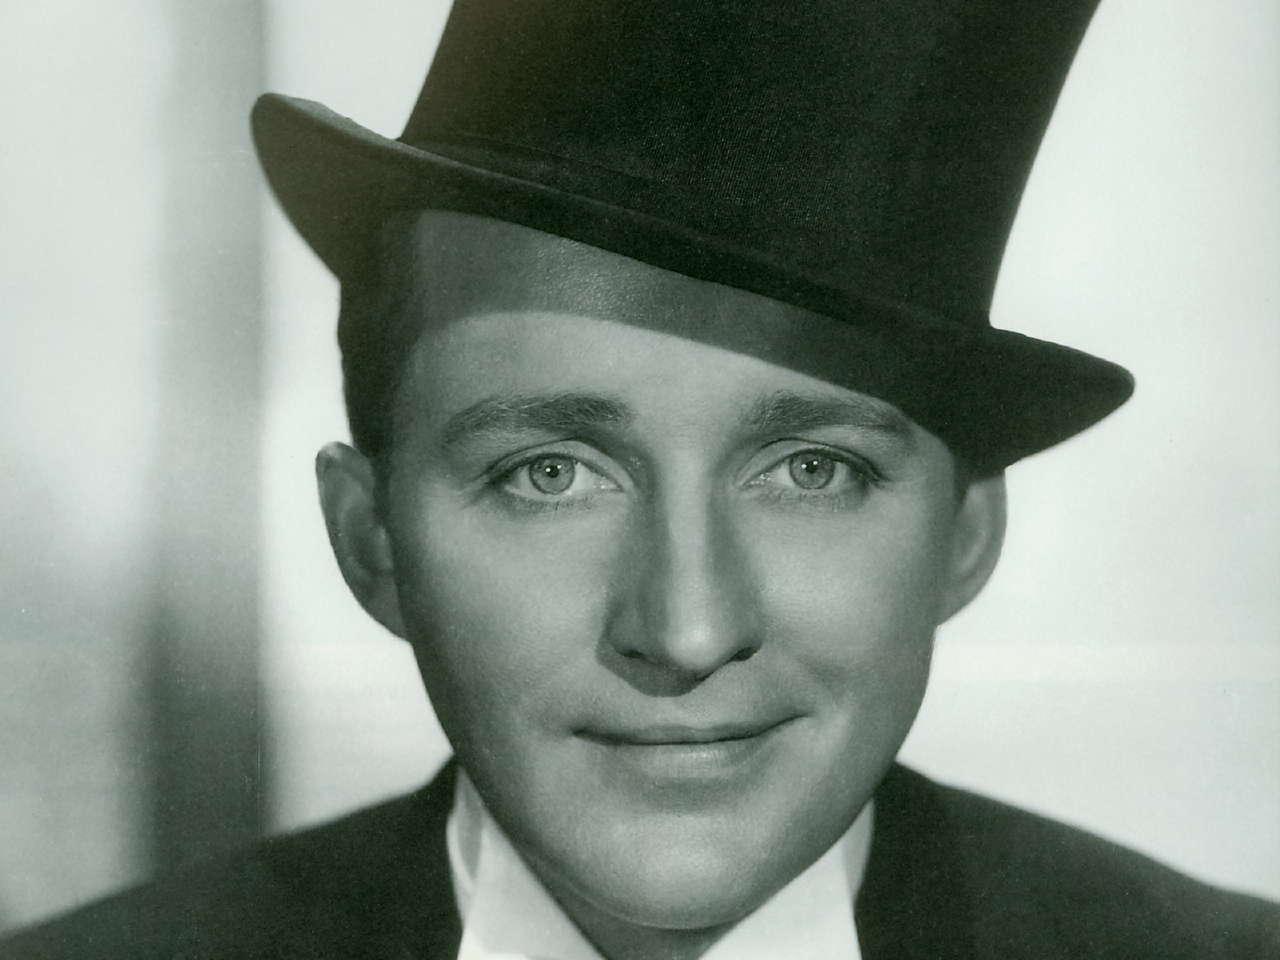 Picture of Bing Crosby Of Celebrities